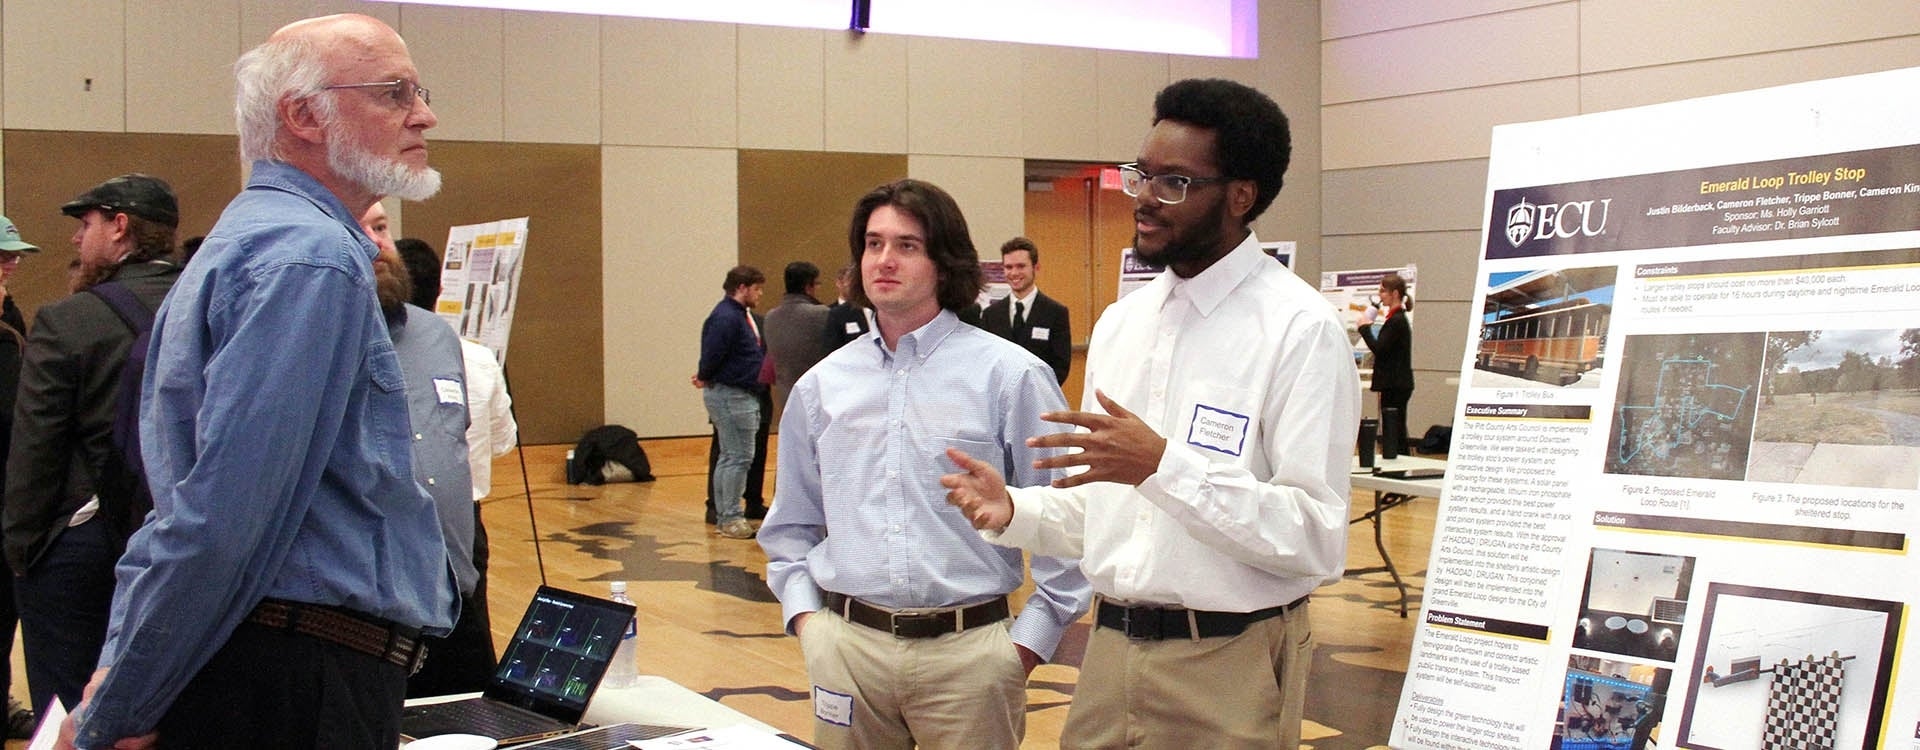 Engineering students Cameron Fletcher, left, and Trippe Bonner, center, discuss improvement to the Emerald Tour Trolley Stop as part of a senior capstone project presentation on Monday at the Main Campus Student Center. (Photos by Ken Buday)